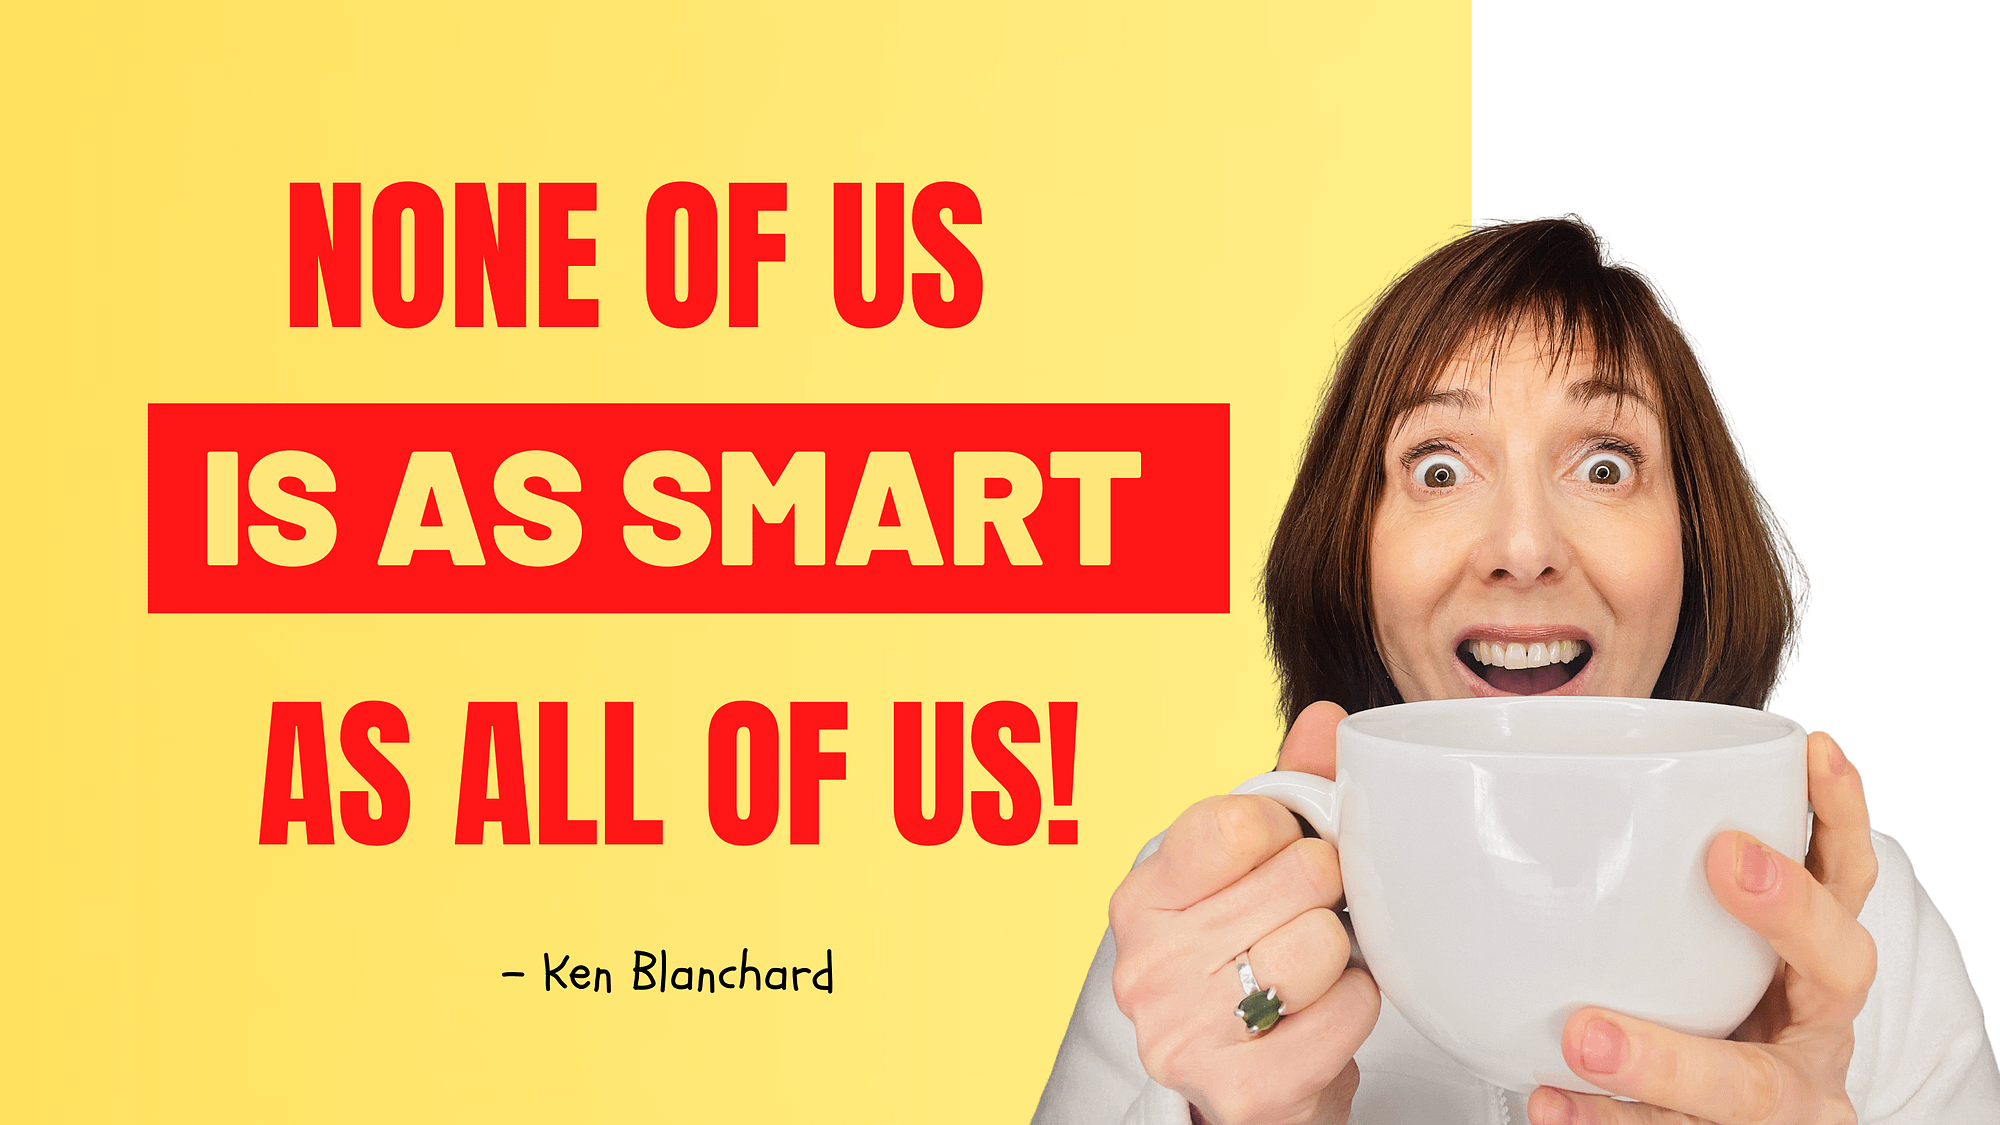 None of us is as smart as all of us by Ken Blanchard